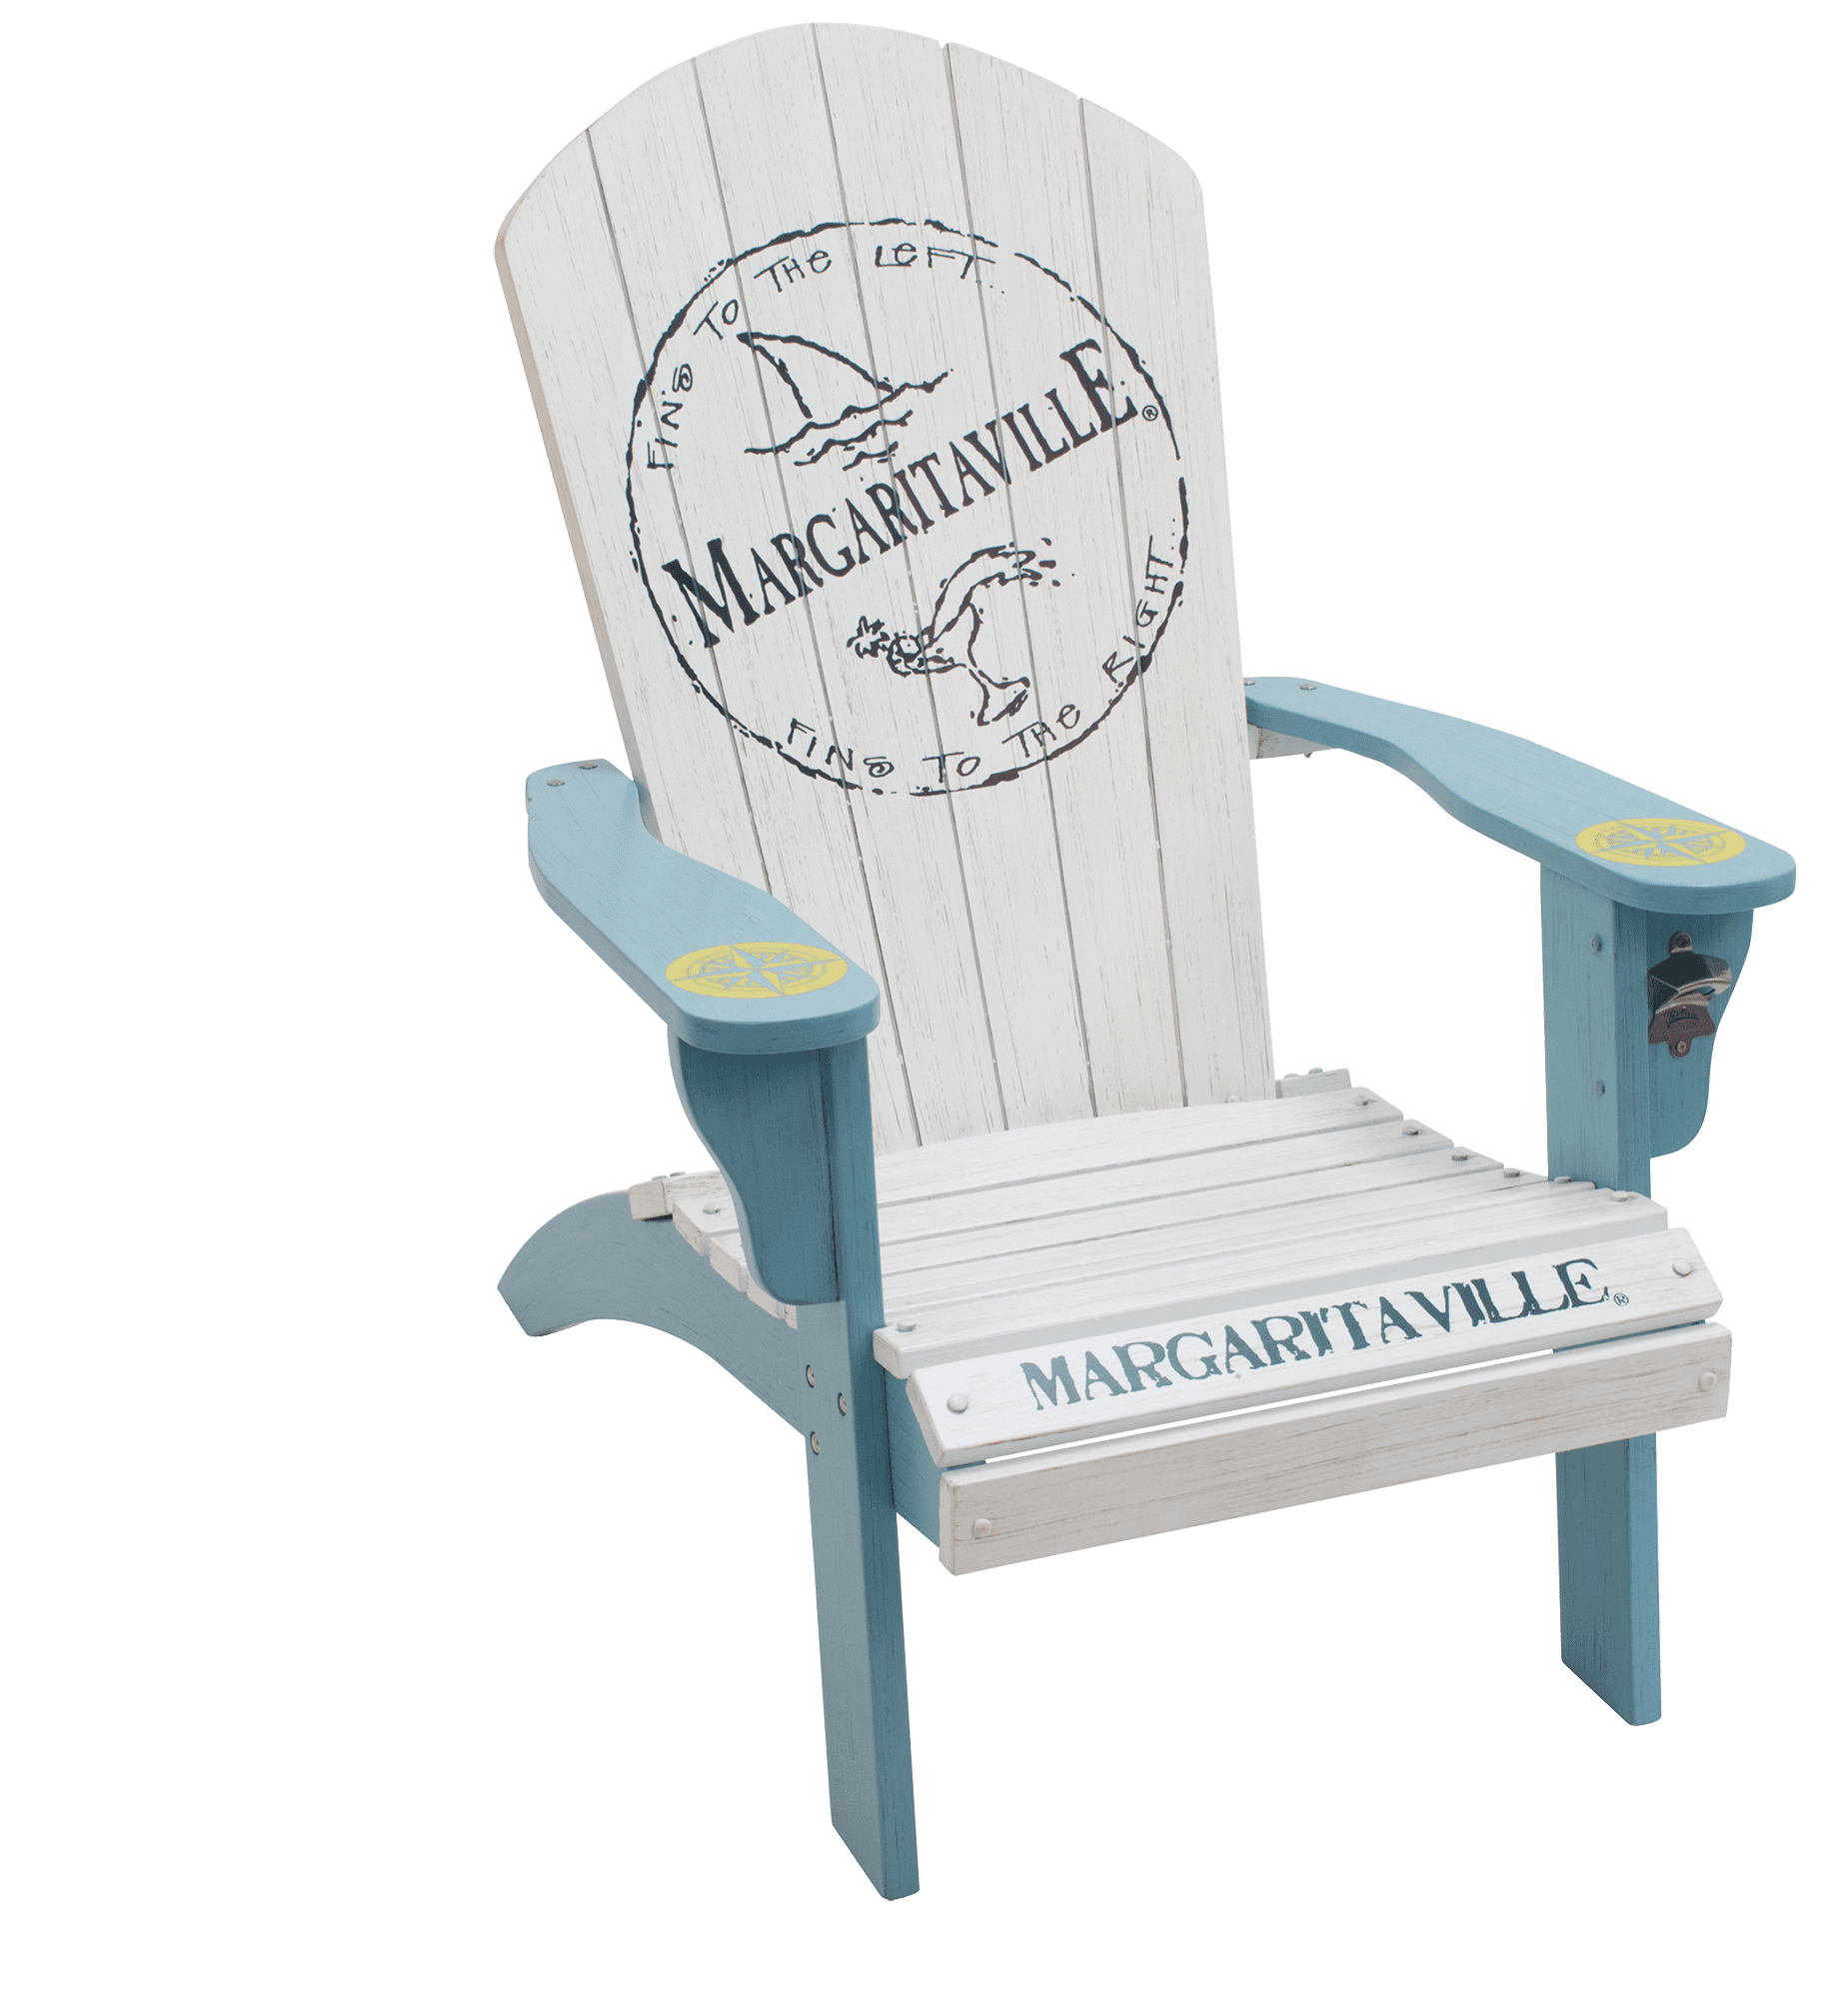 Margaritaville Wood Adirondack Chair Fins to the Left